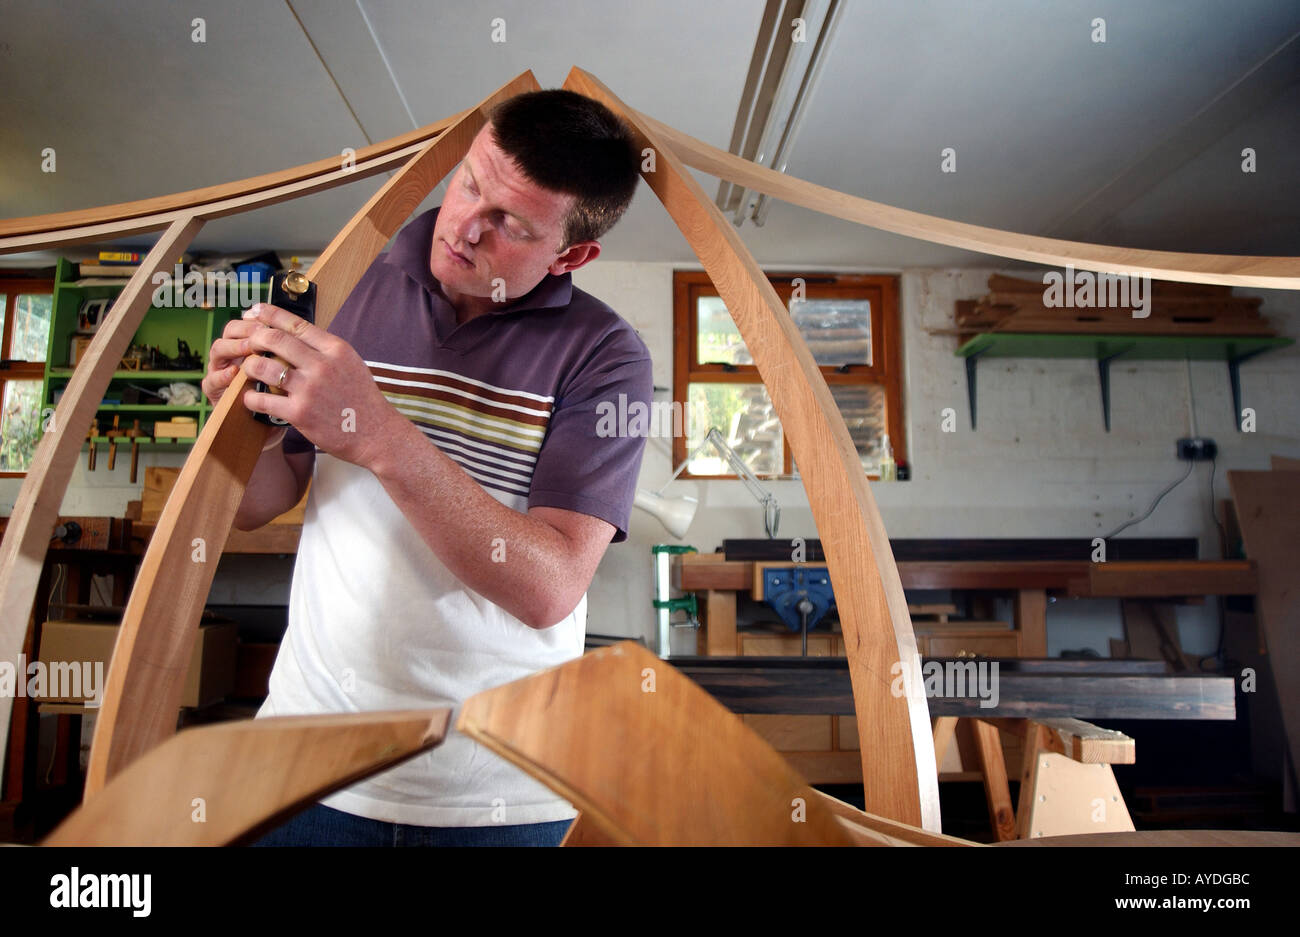 A Cabinet Maker Using Tools And Working In His Studio Stock Photo